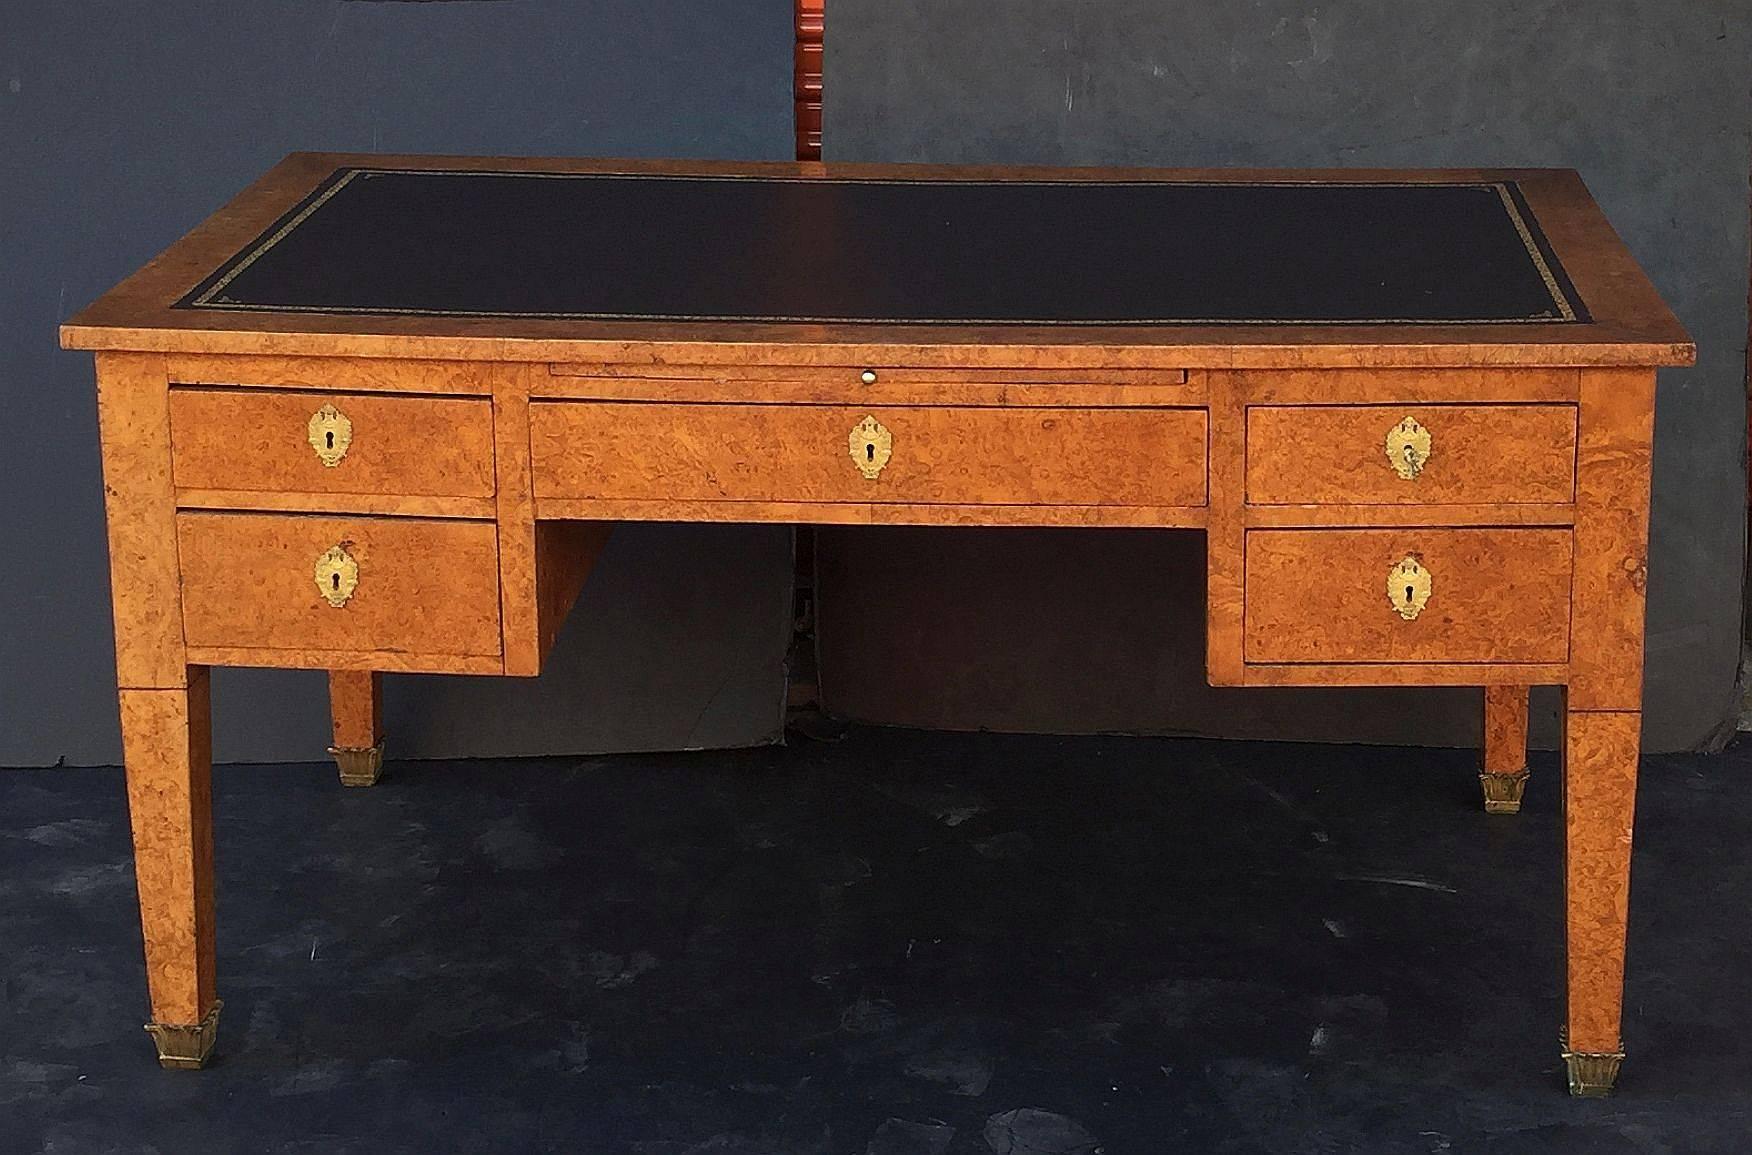 A handsome large Italian desk or writing table, featuring a moulded top of burled wood with inset black leather and embossed gilt edge.
Over a frieze of five working drawers (one large drawer between four small drawers) and working slide (also with